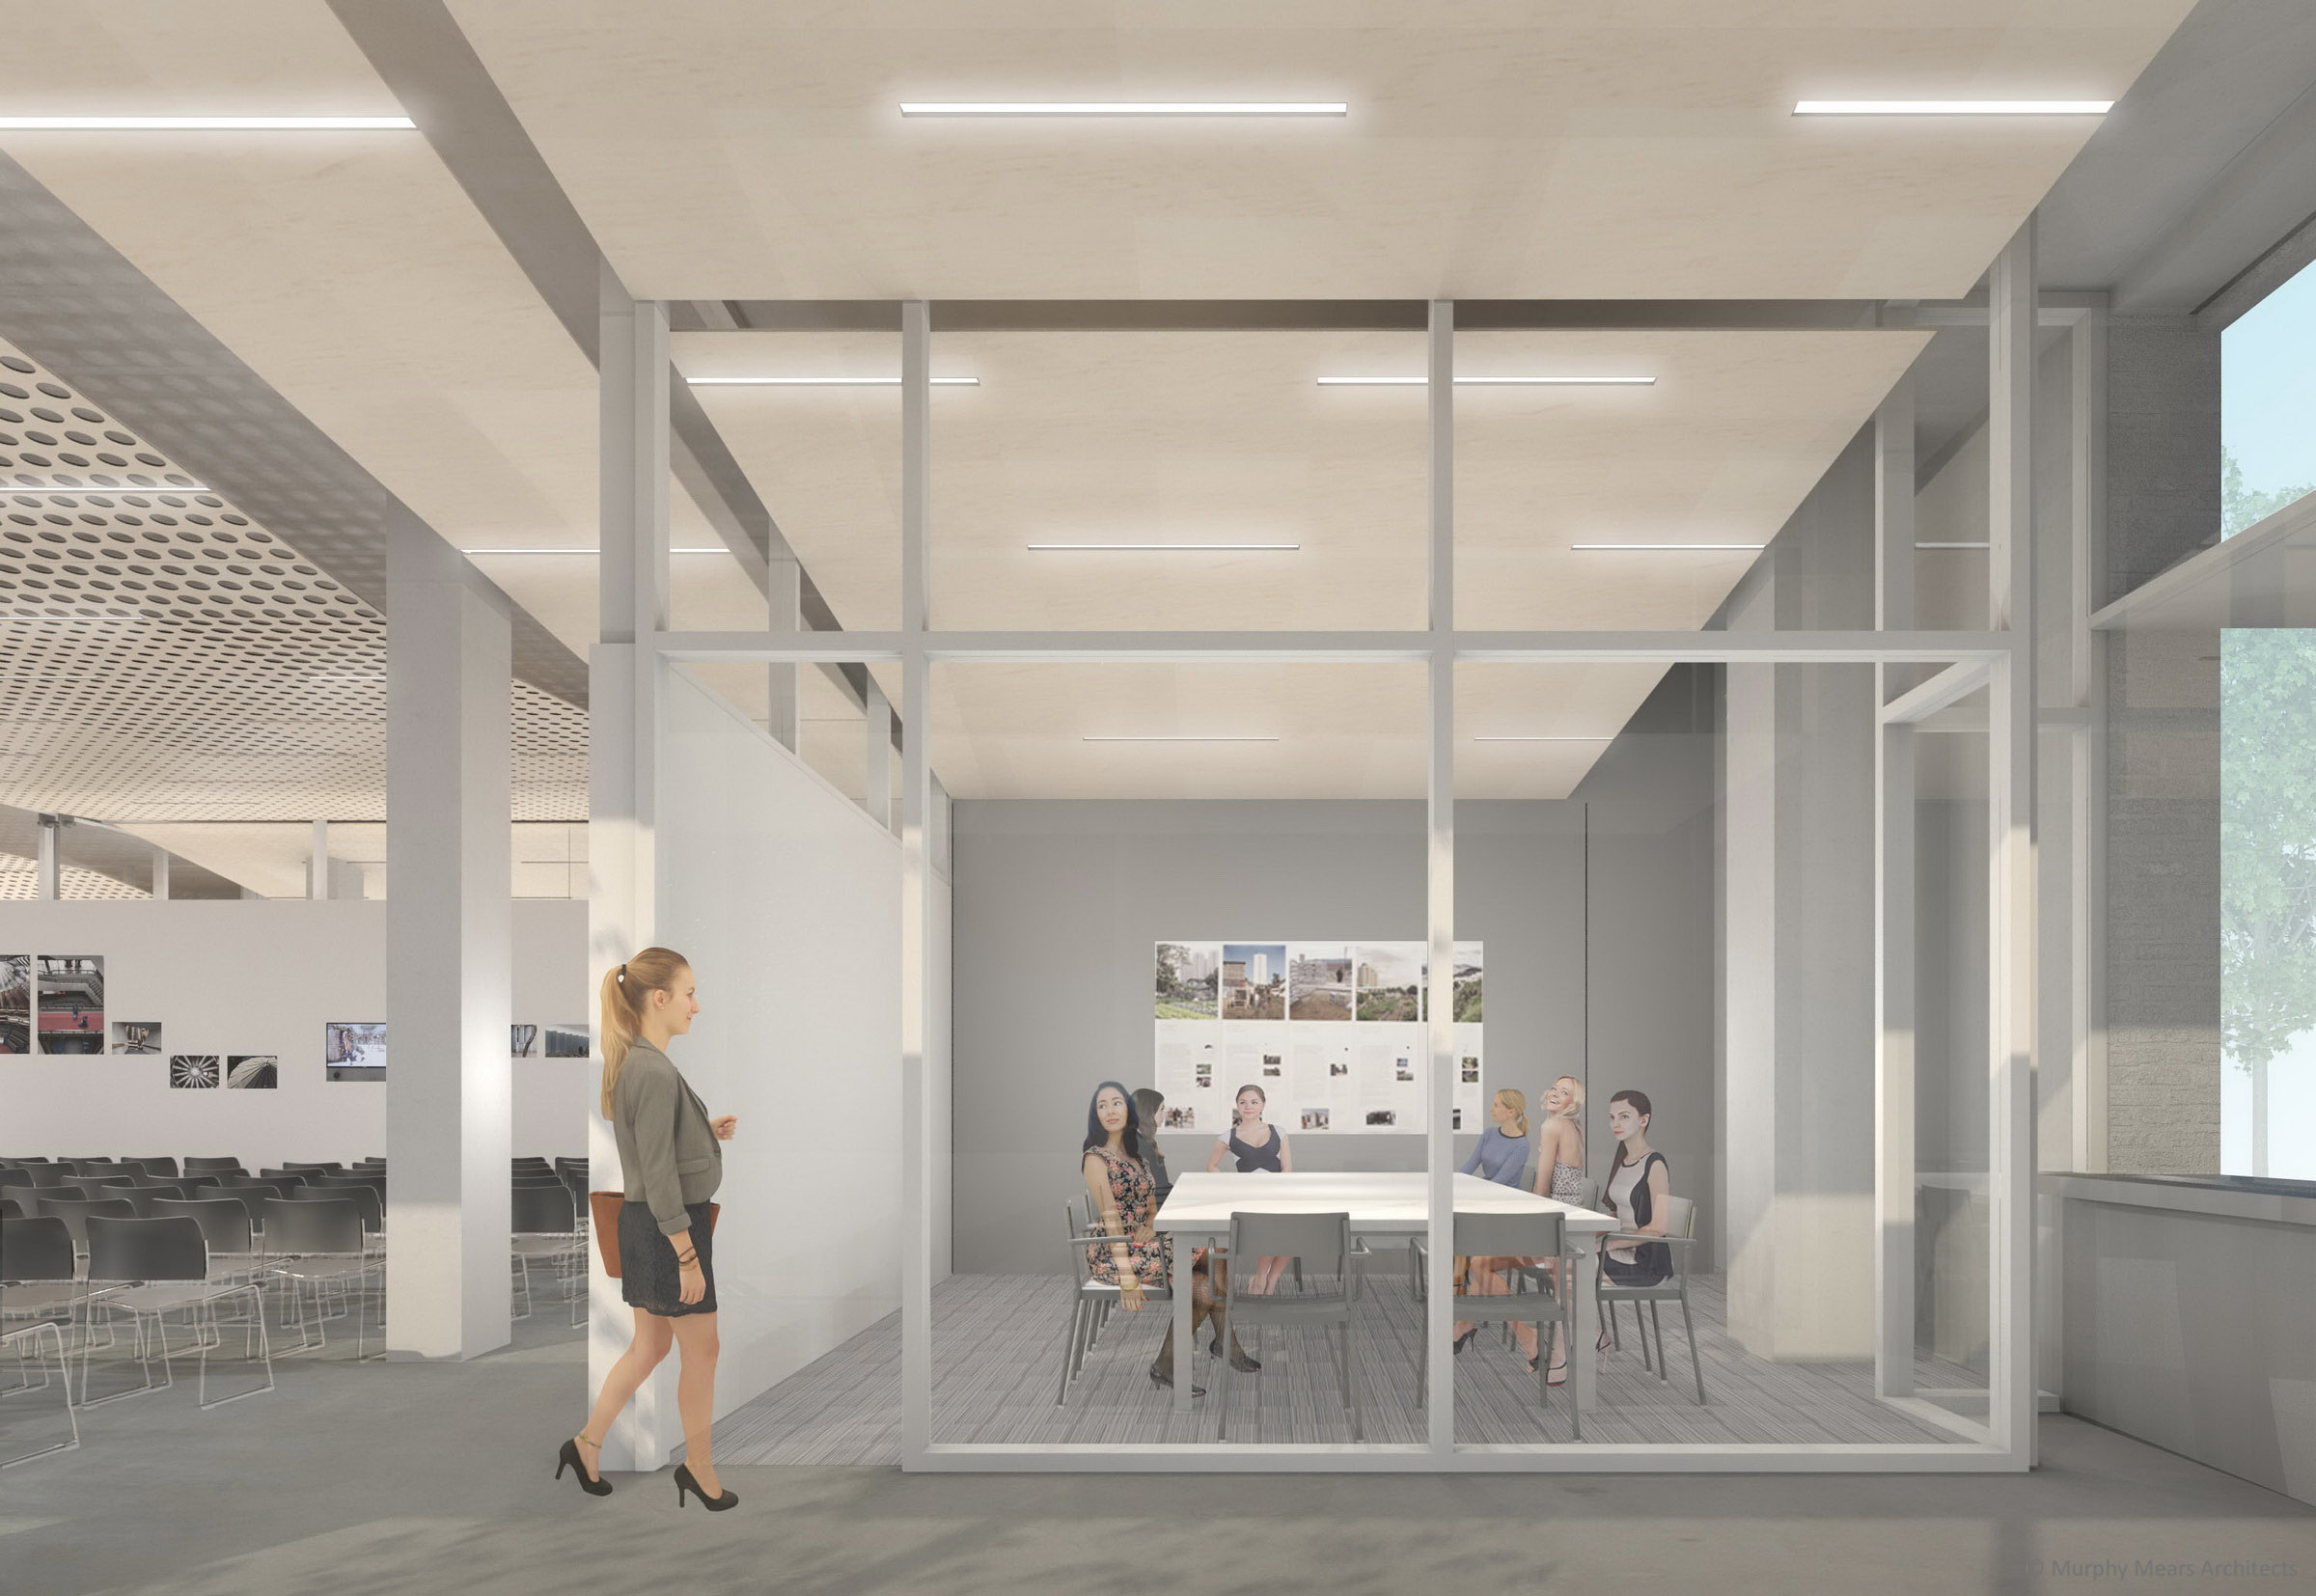 Architecture Center Houston - Competition Rendering - Operable partition closed to form two medium sized conference rooms.